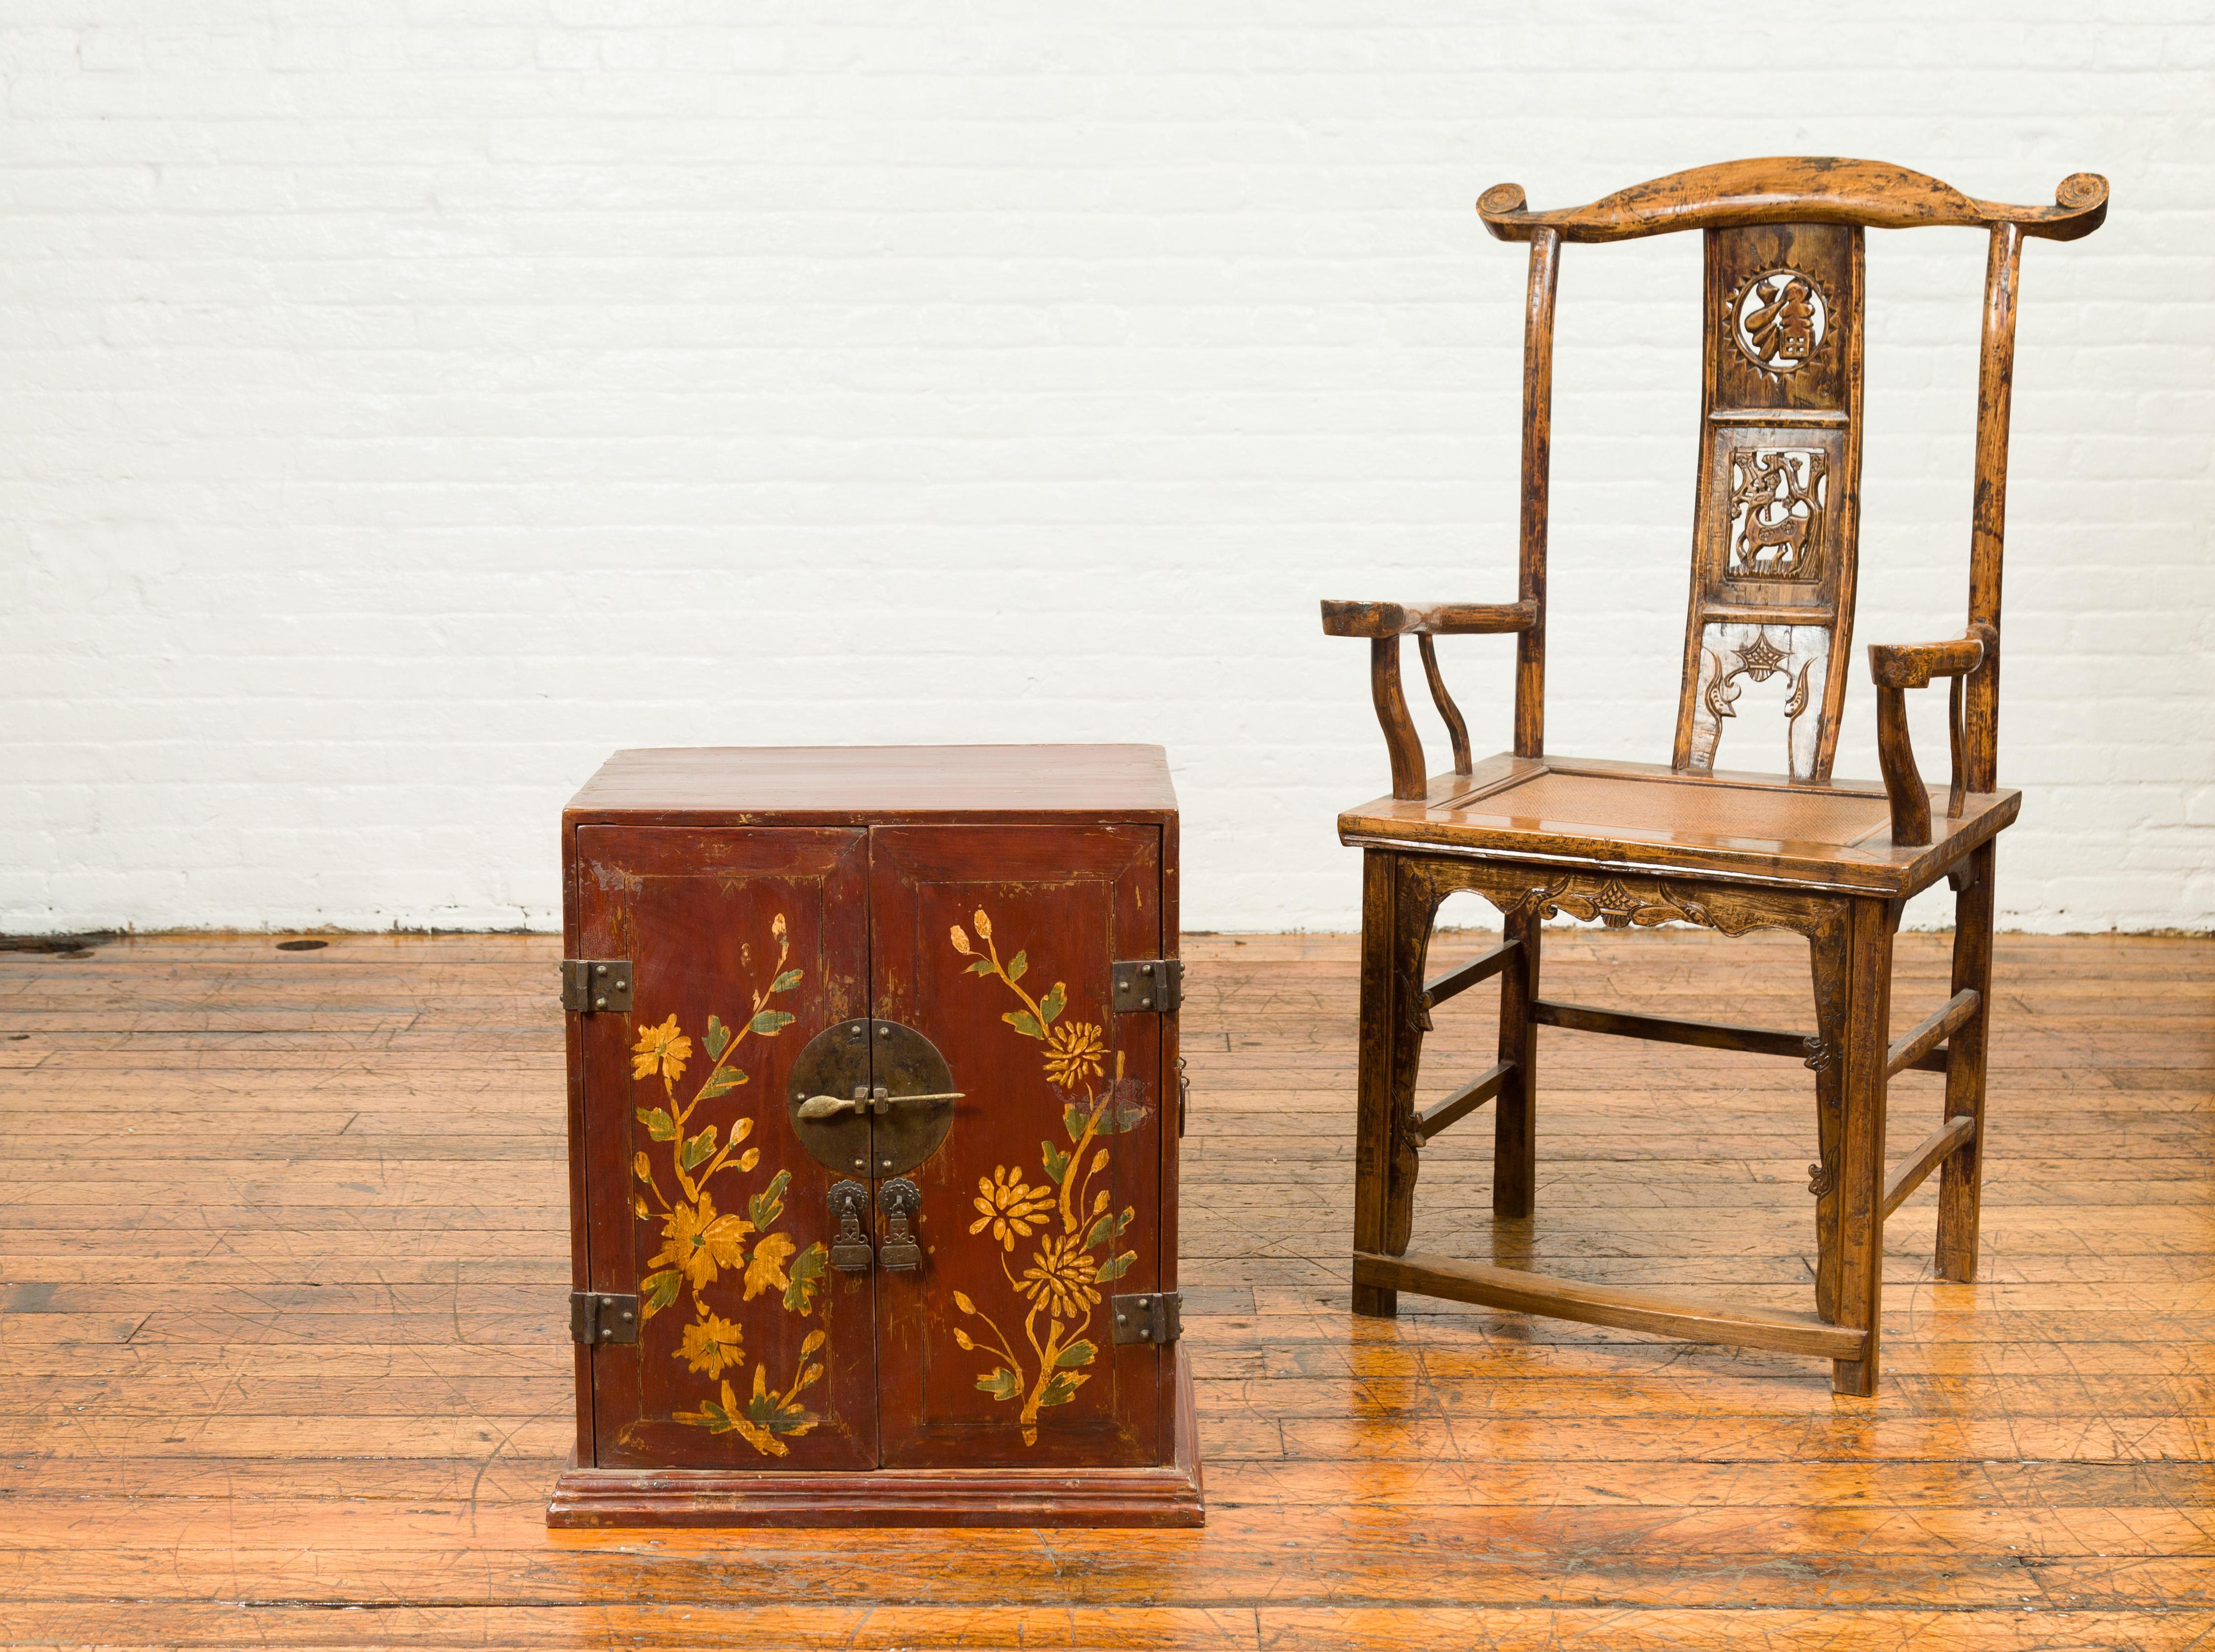 A Chinese Qing dynasty brown / dark red wooden side cabinet from the 19th century, with painted floral decor, bronze hardware and hidden drawers. This Qing Dynasty side cabinet, originating from 19th-century China, is a masterpiece of artistry and